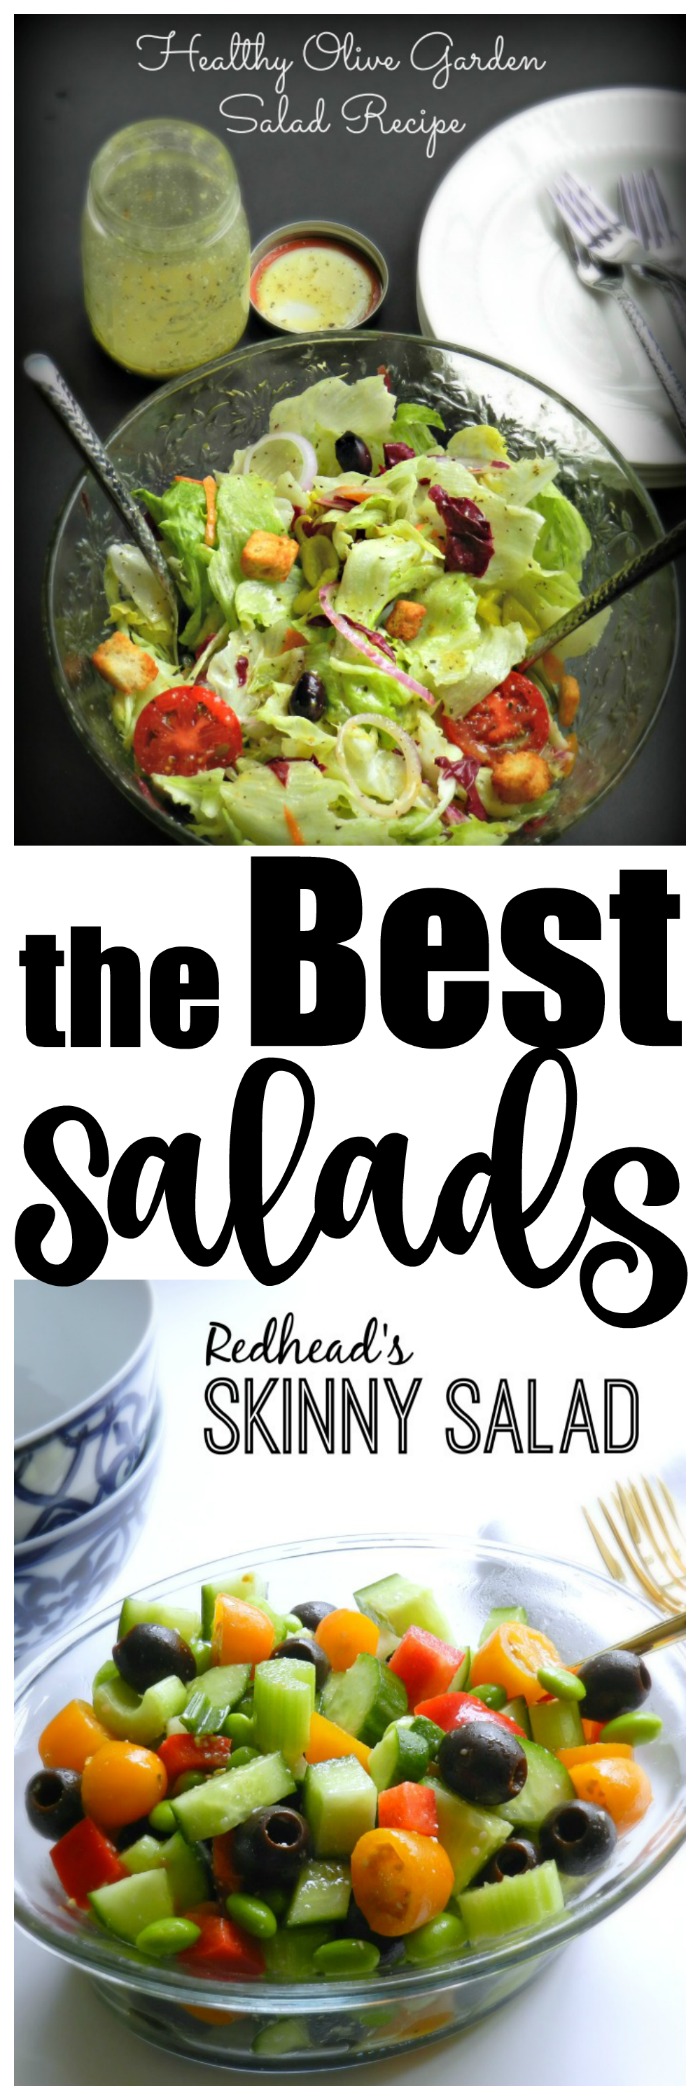 Redhead's Skinny Salad is one of the best salads I have ever made. She uses her Olive Garden Salad hack dressing and it is AMAZING.